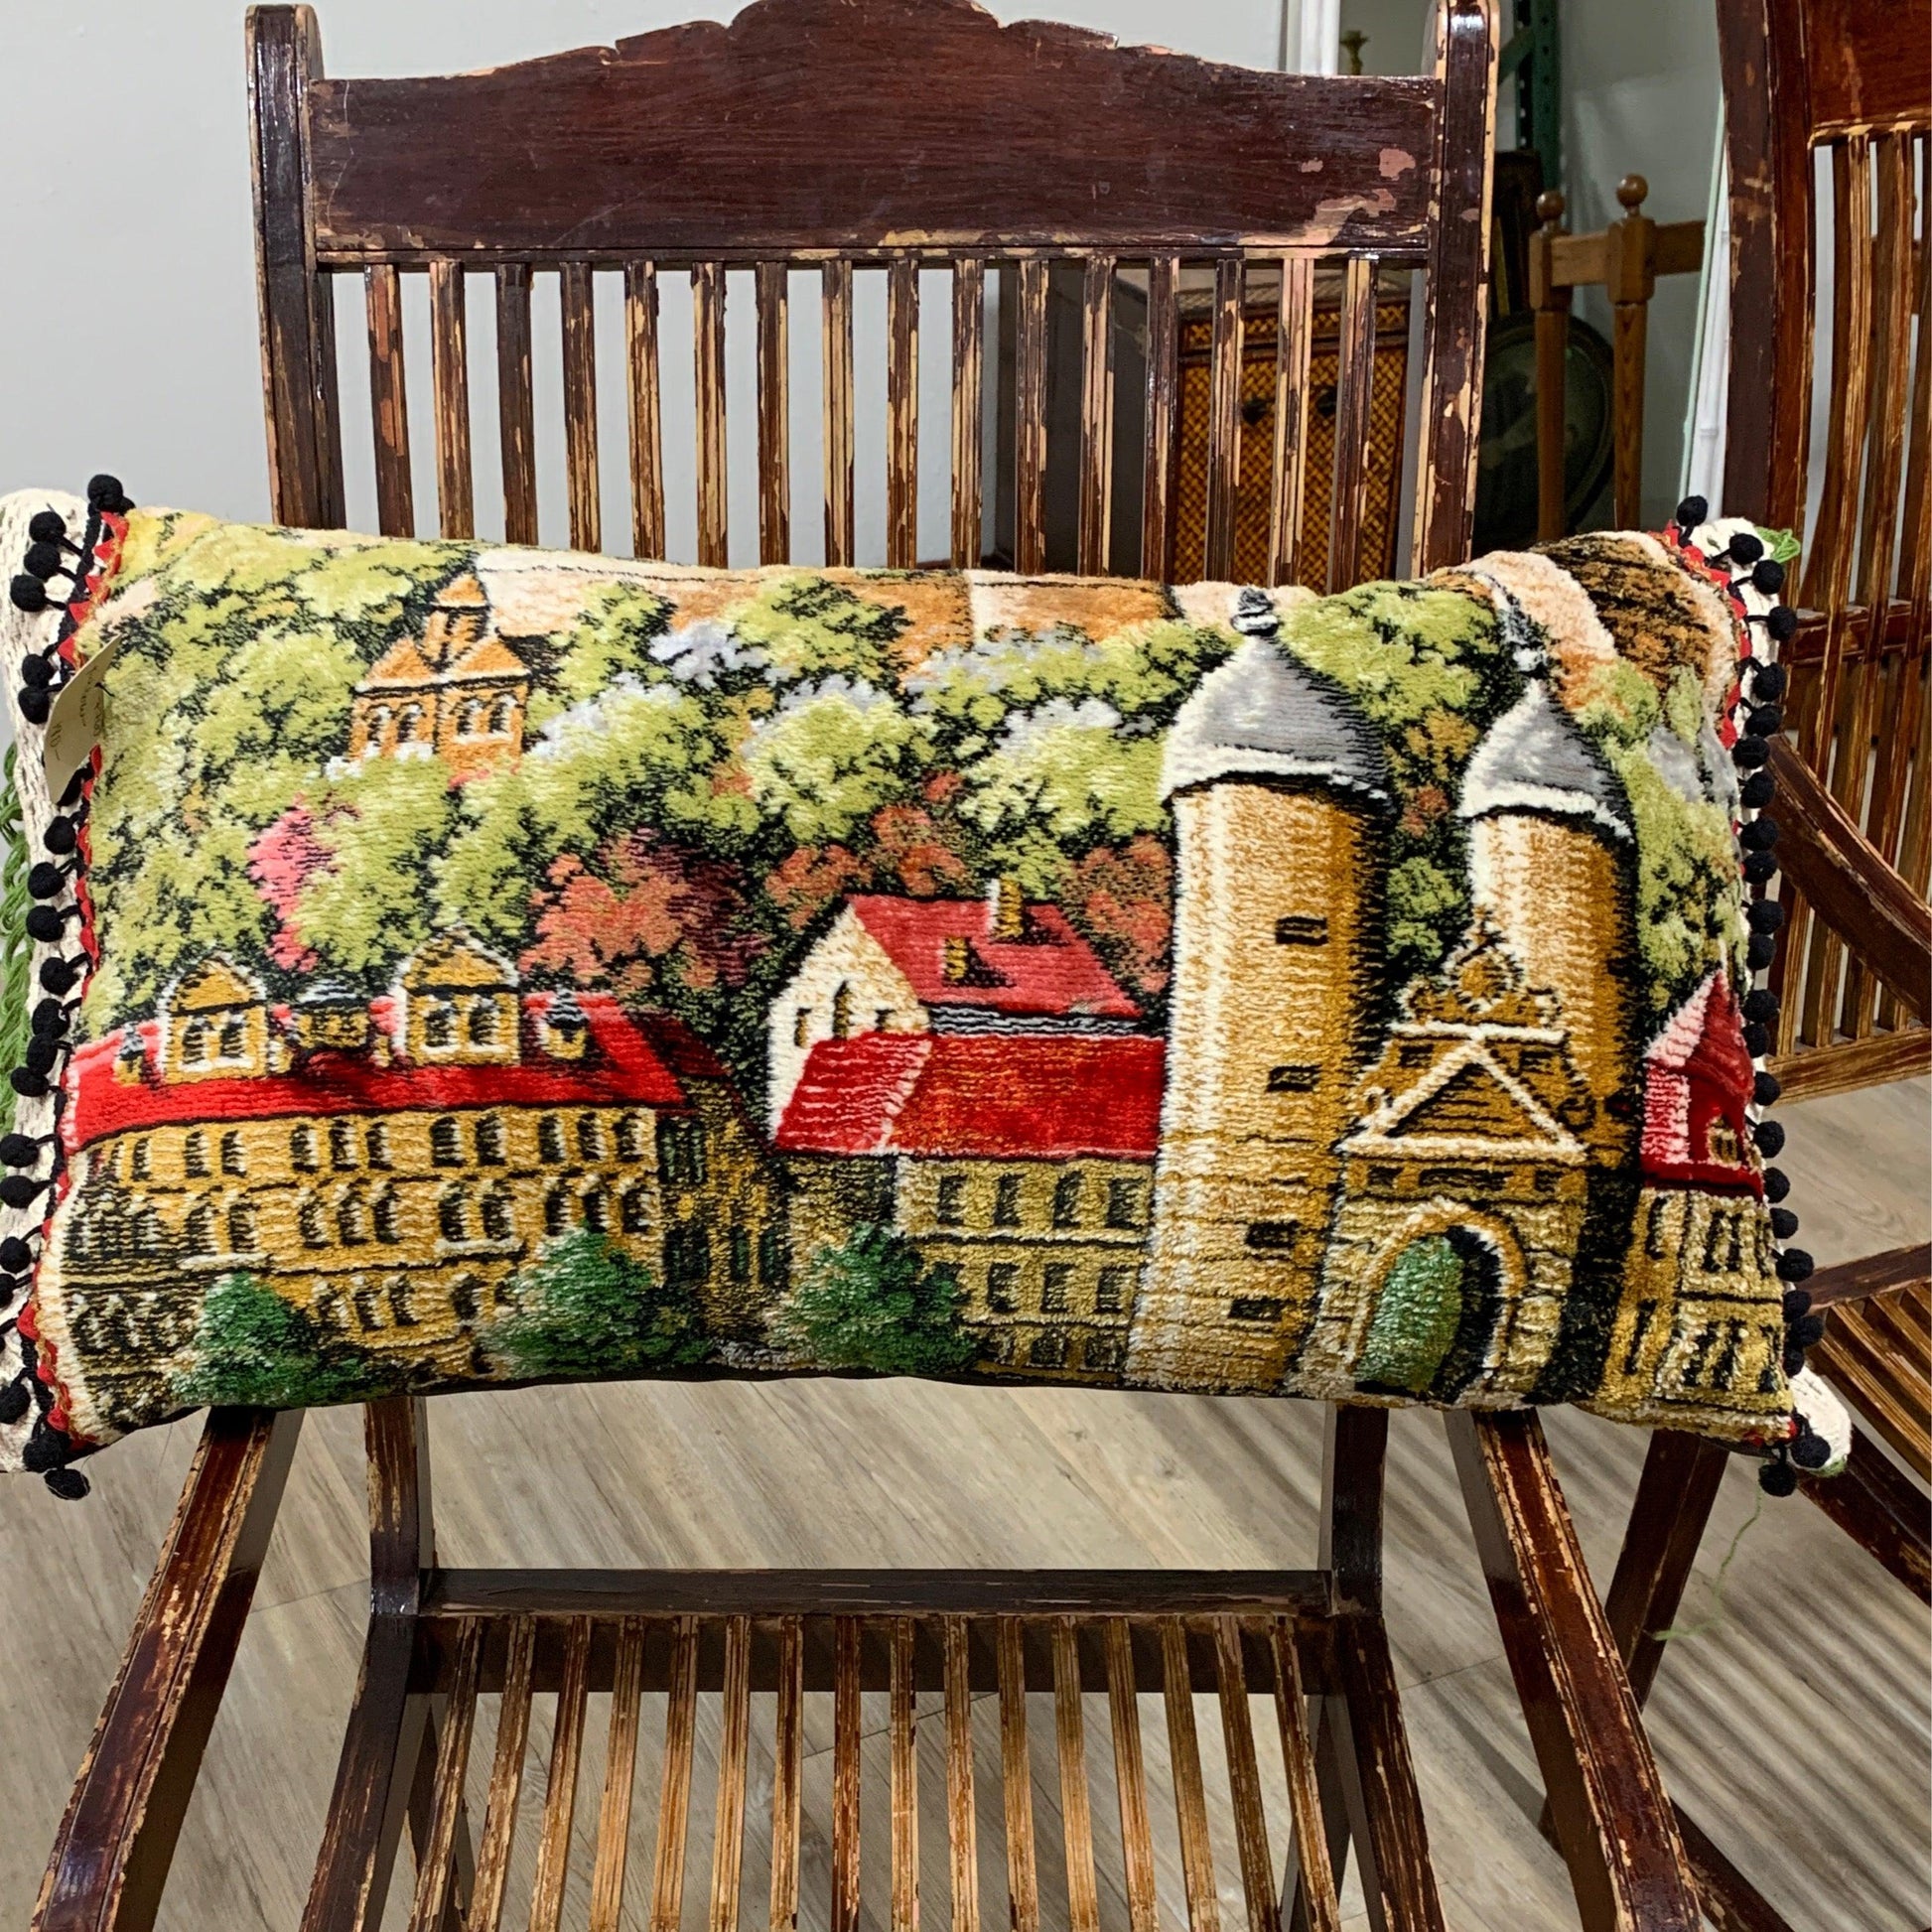 Color Embroidered Pillow with Provencal Scene - The White Barn Antiques